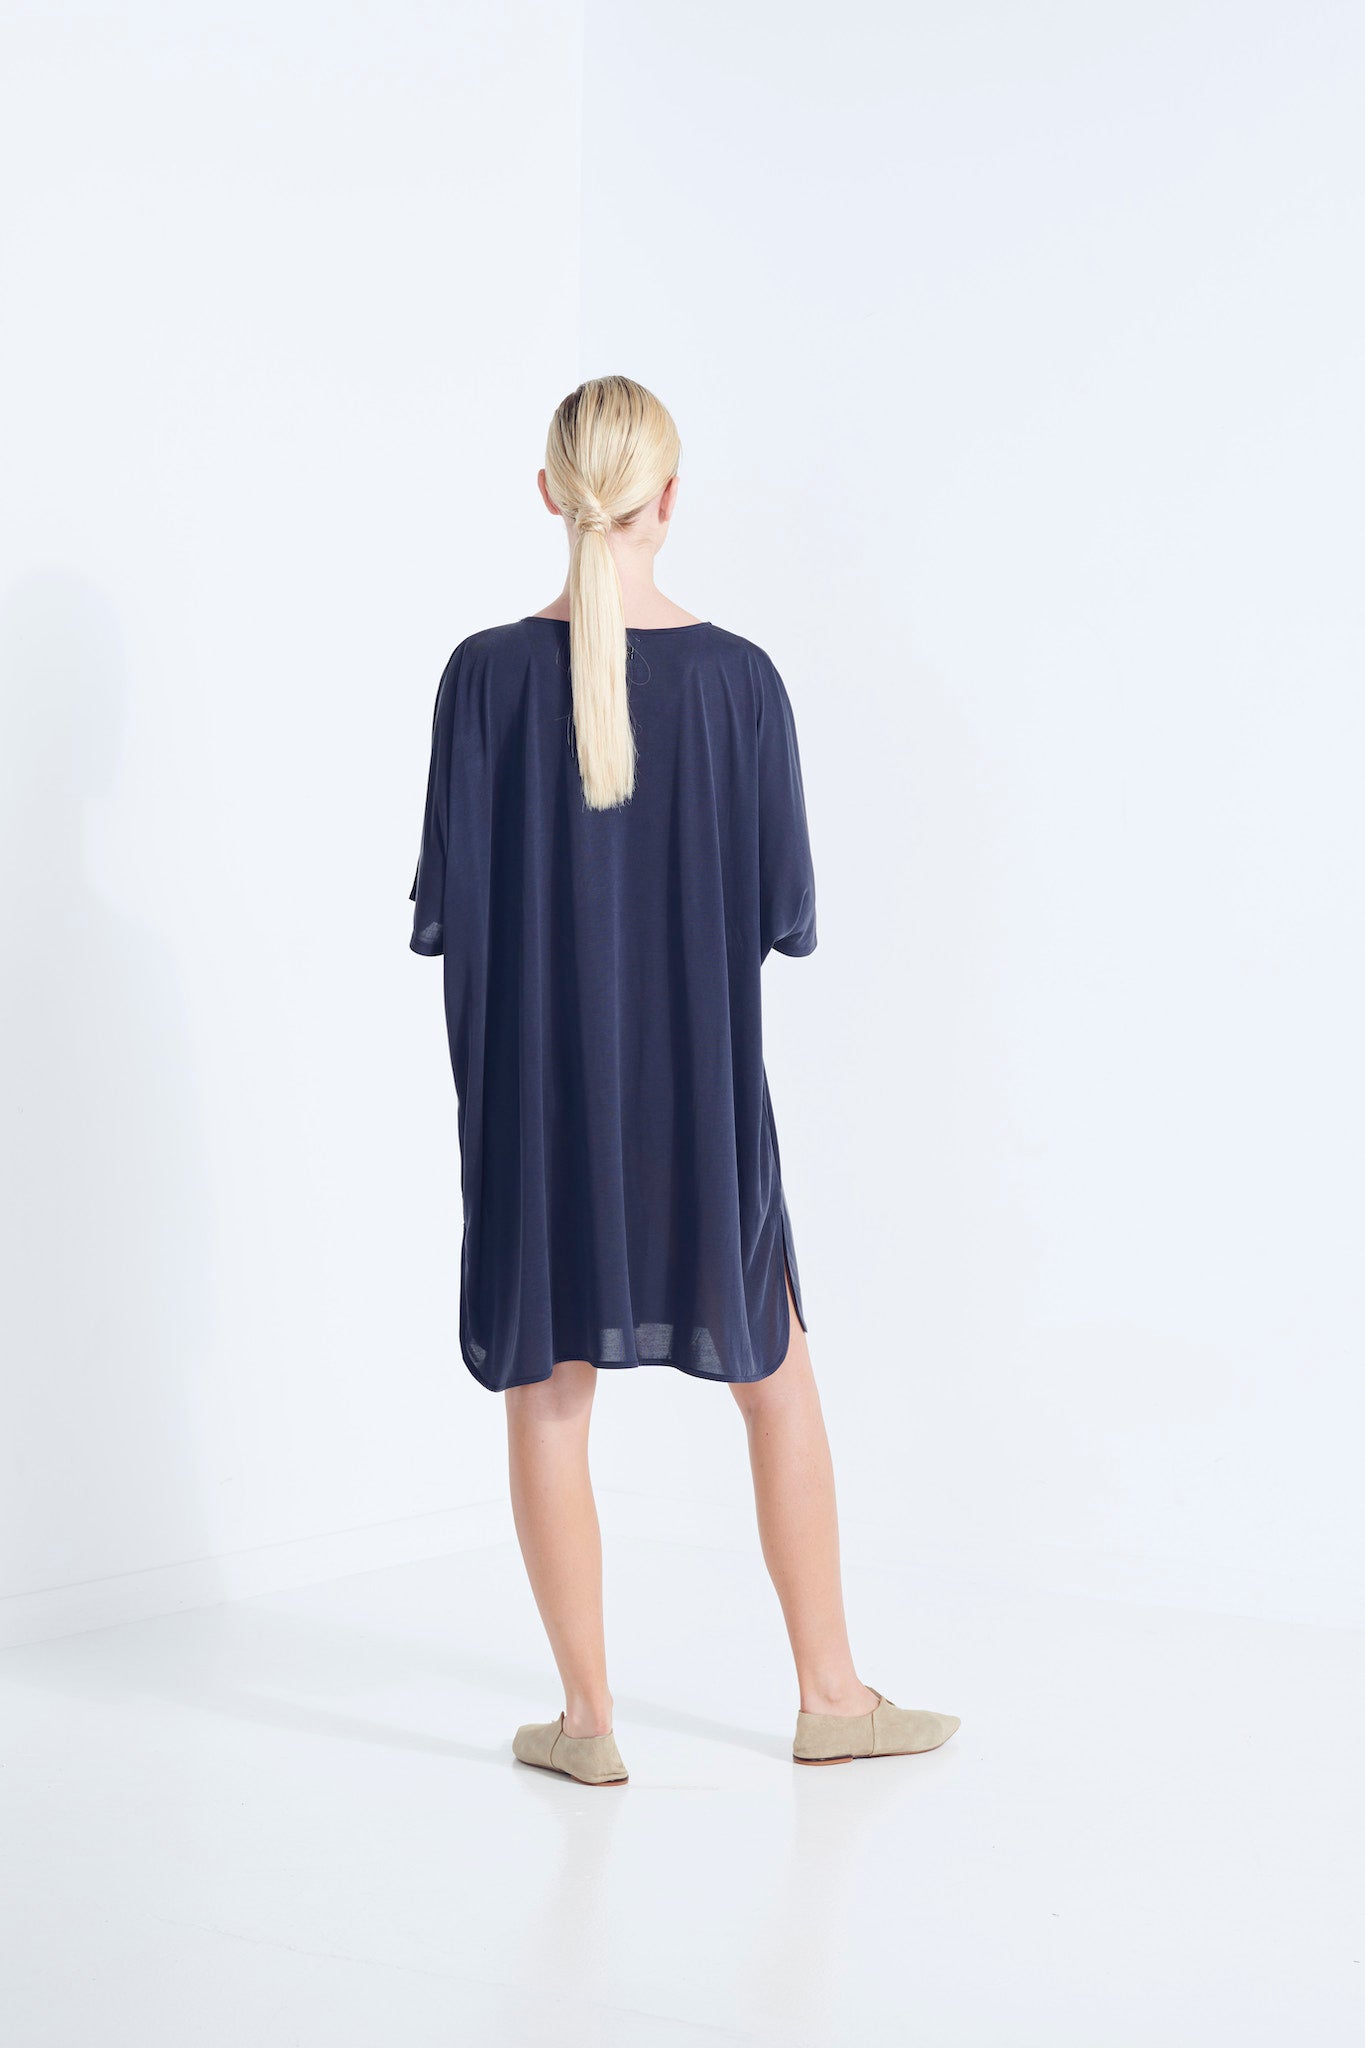 THEMIS DRESS LONGLINE T-SHIRT BEECHWOOD MODAL STRETCH WITH REMOVABLE TIE AEGEAN WASHED NAVY  BACK VIEW